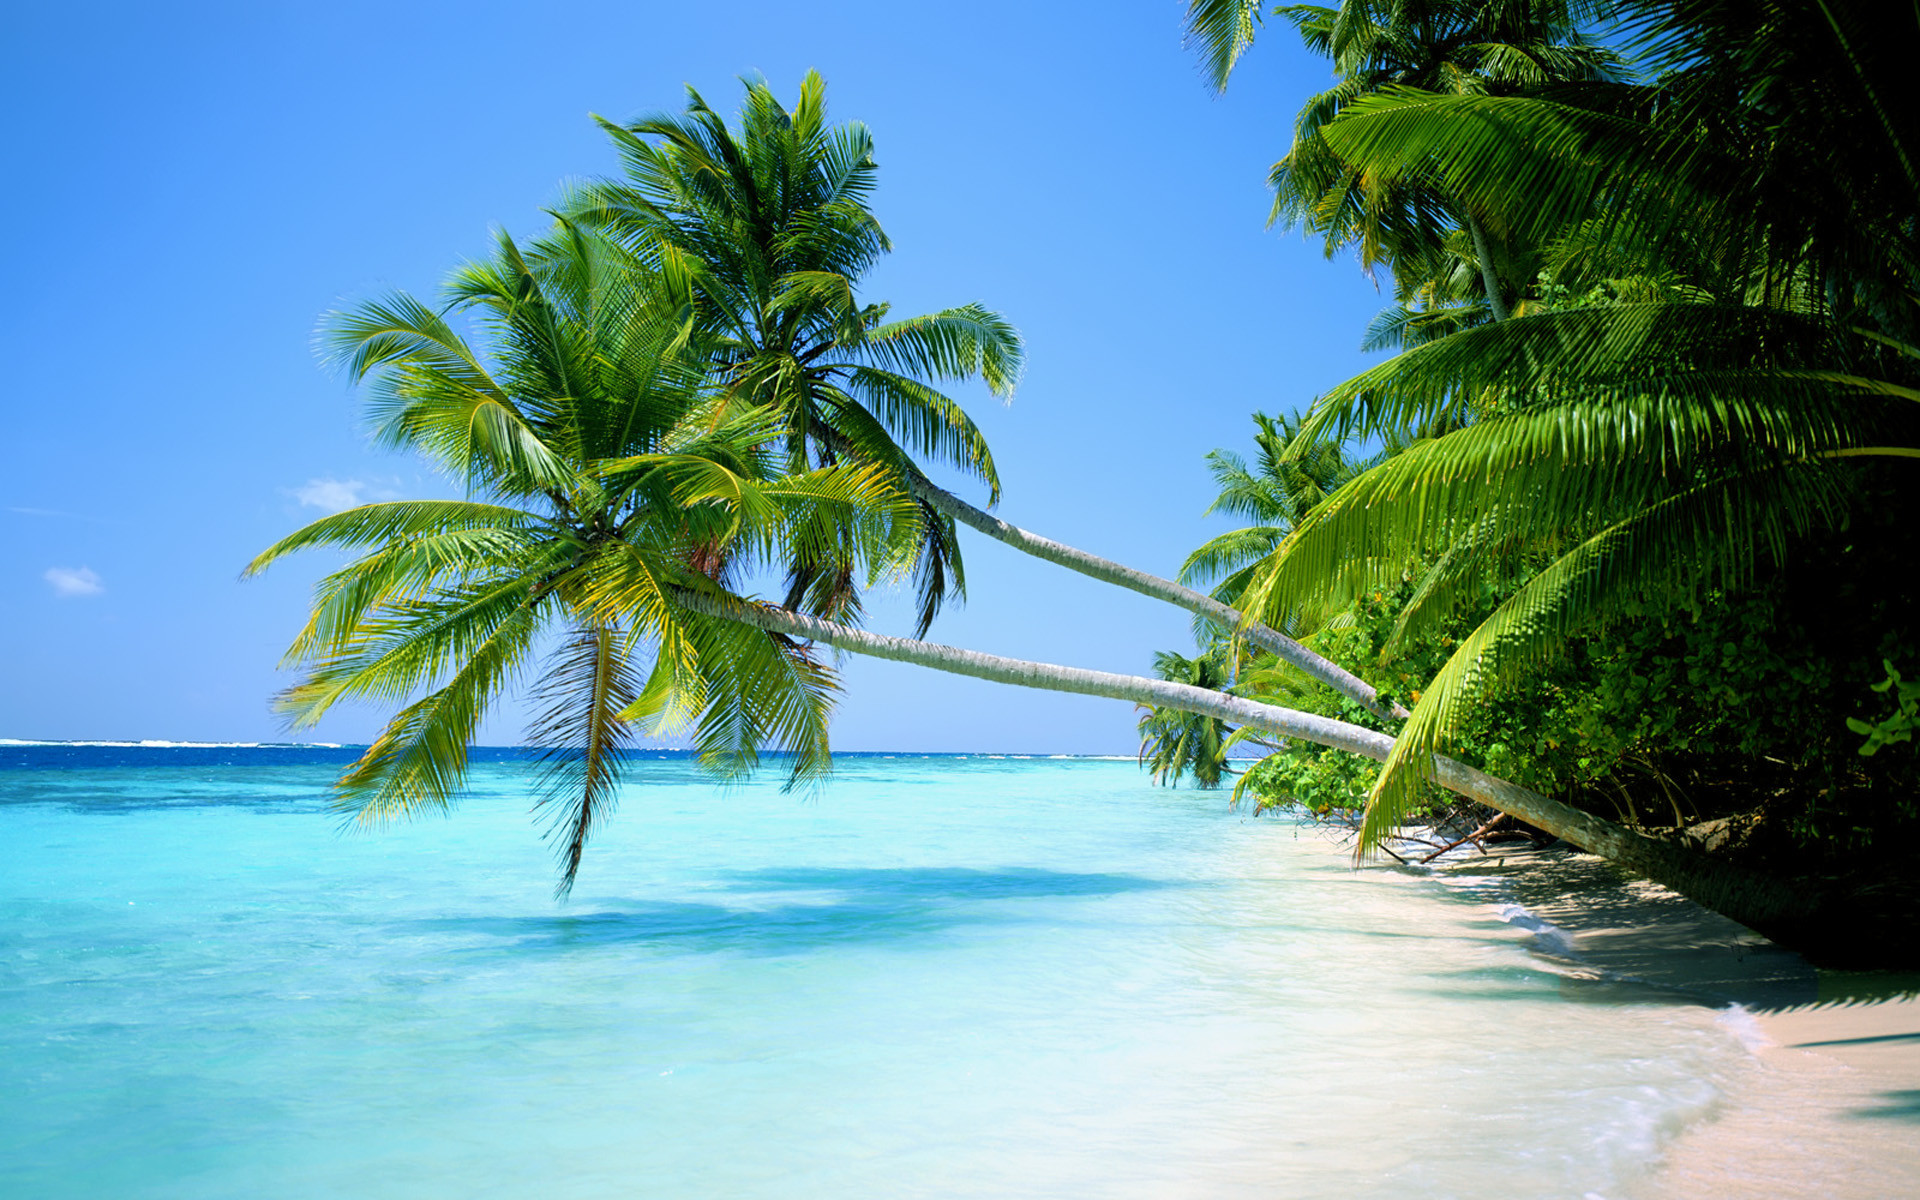 1920x1200 beach with palm trees. beach landscape with palm tree trees n